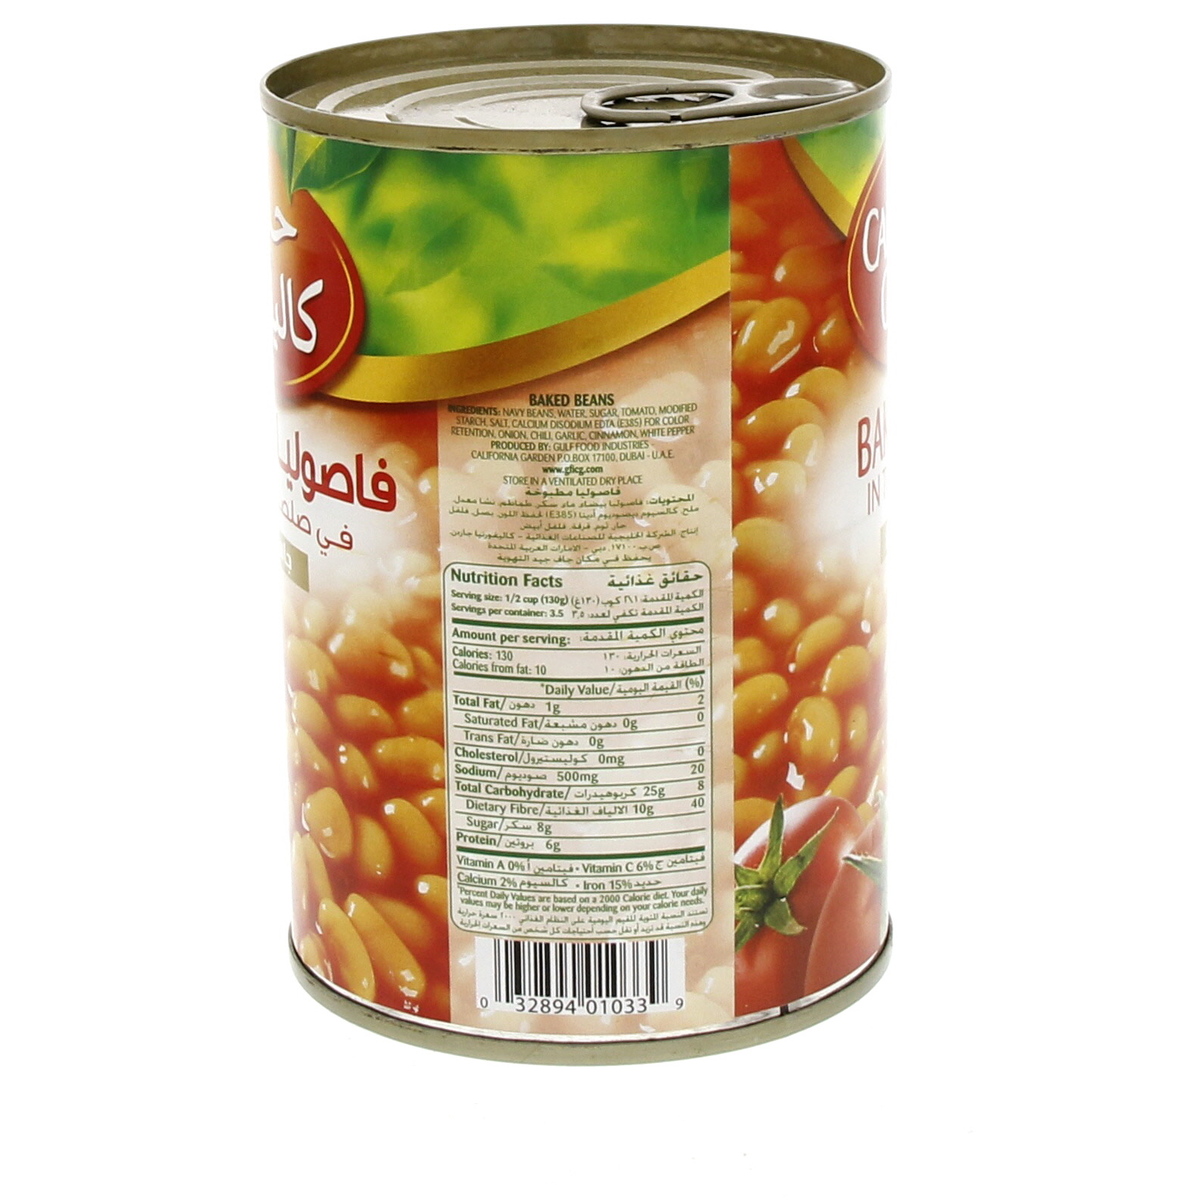 California Garden Canned Baked Beans In Tomato Sauce 420g